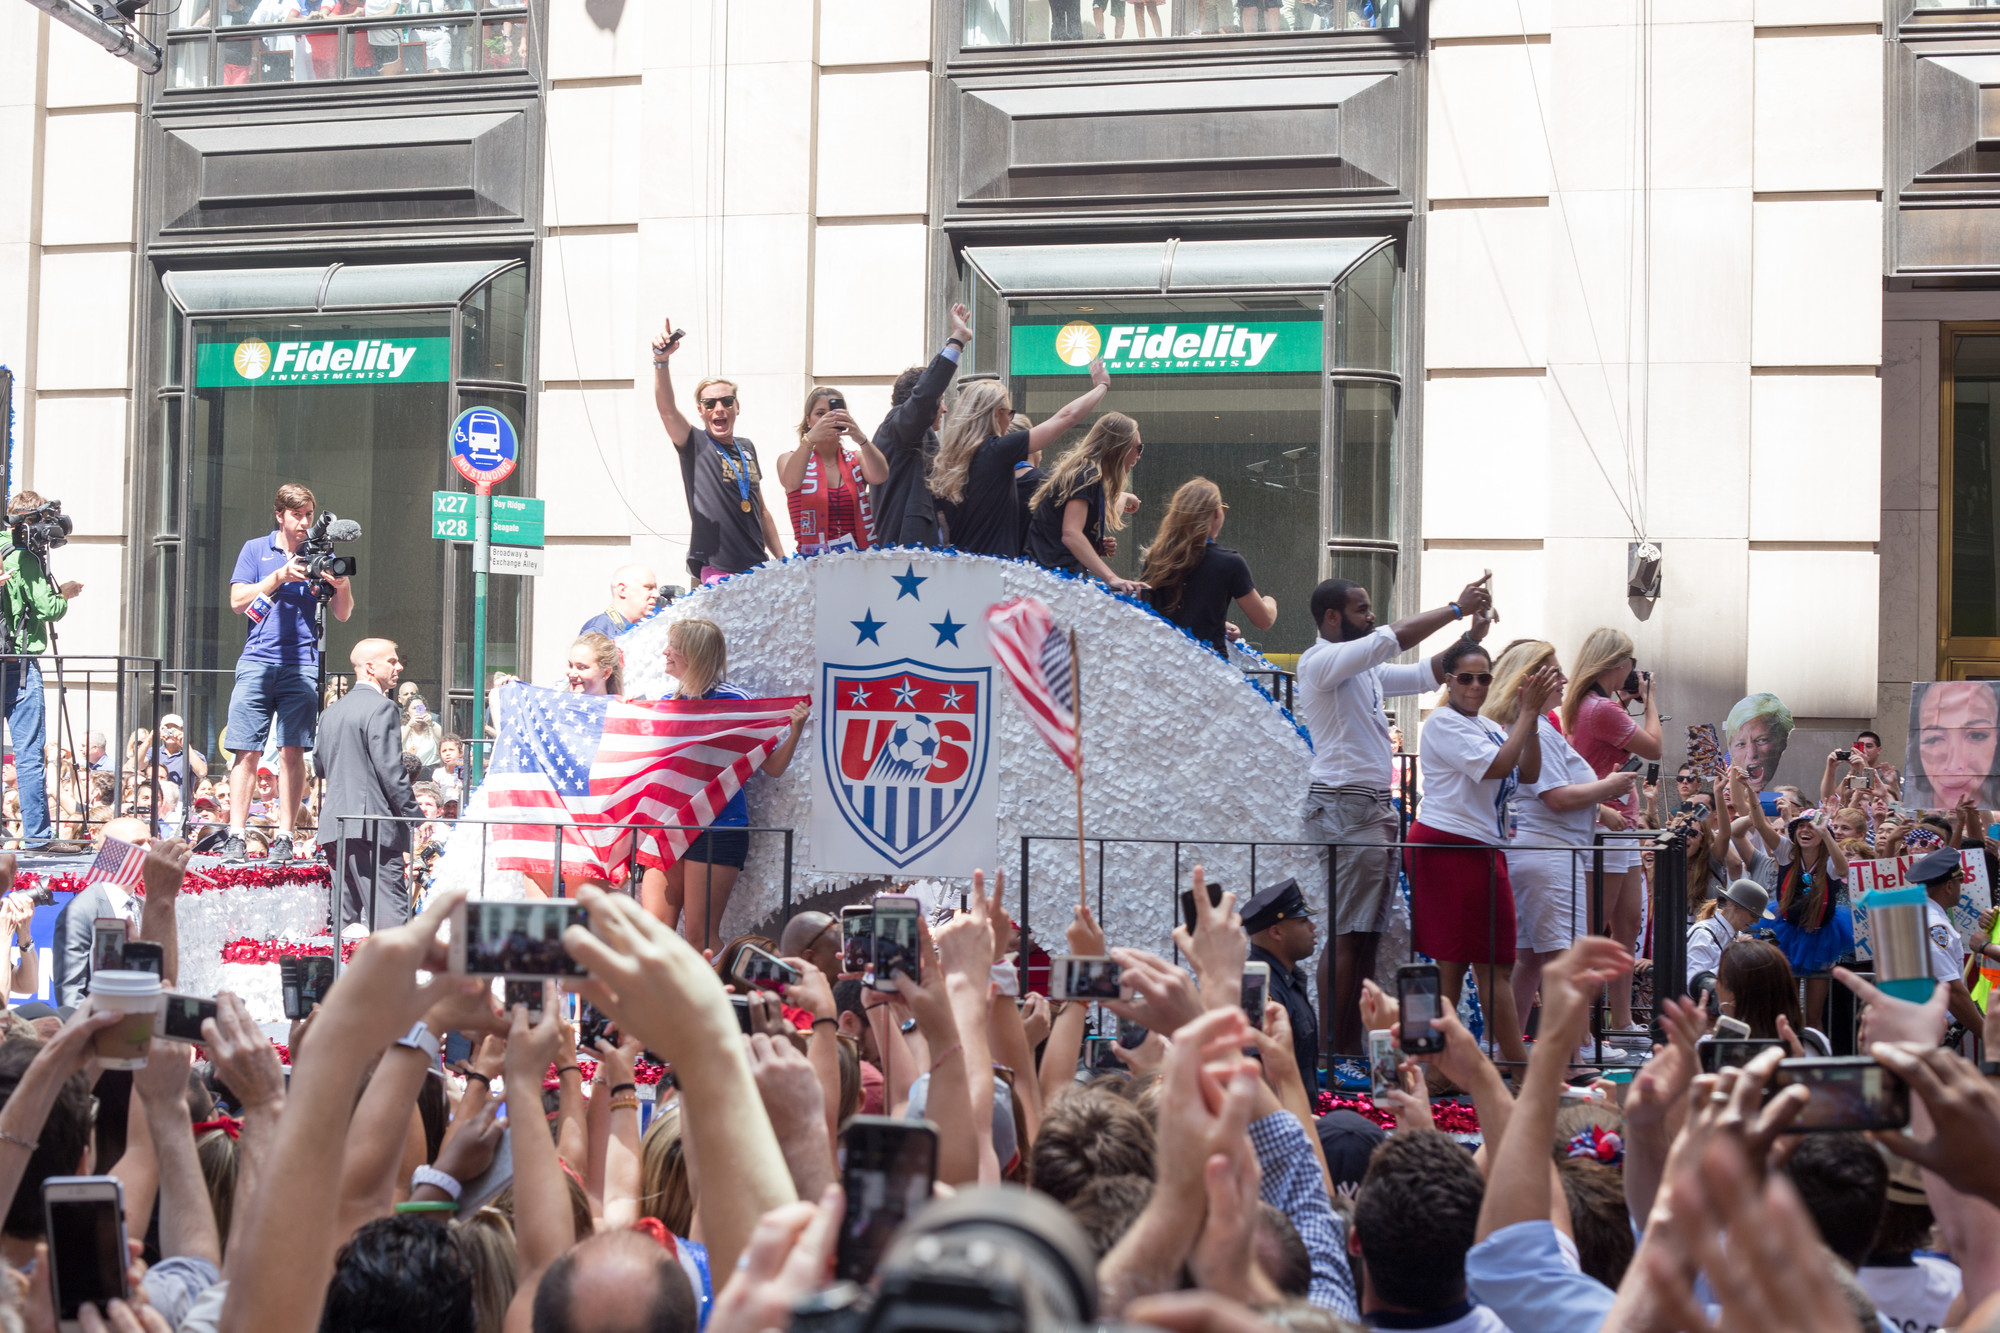 Thousands of supporters cheered on the Women’s U.S. national soccer team as they proceeded down Broadway at their celebratory ticker-tape parade last Friday.